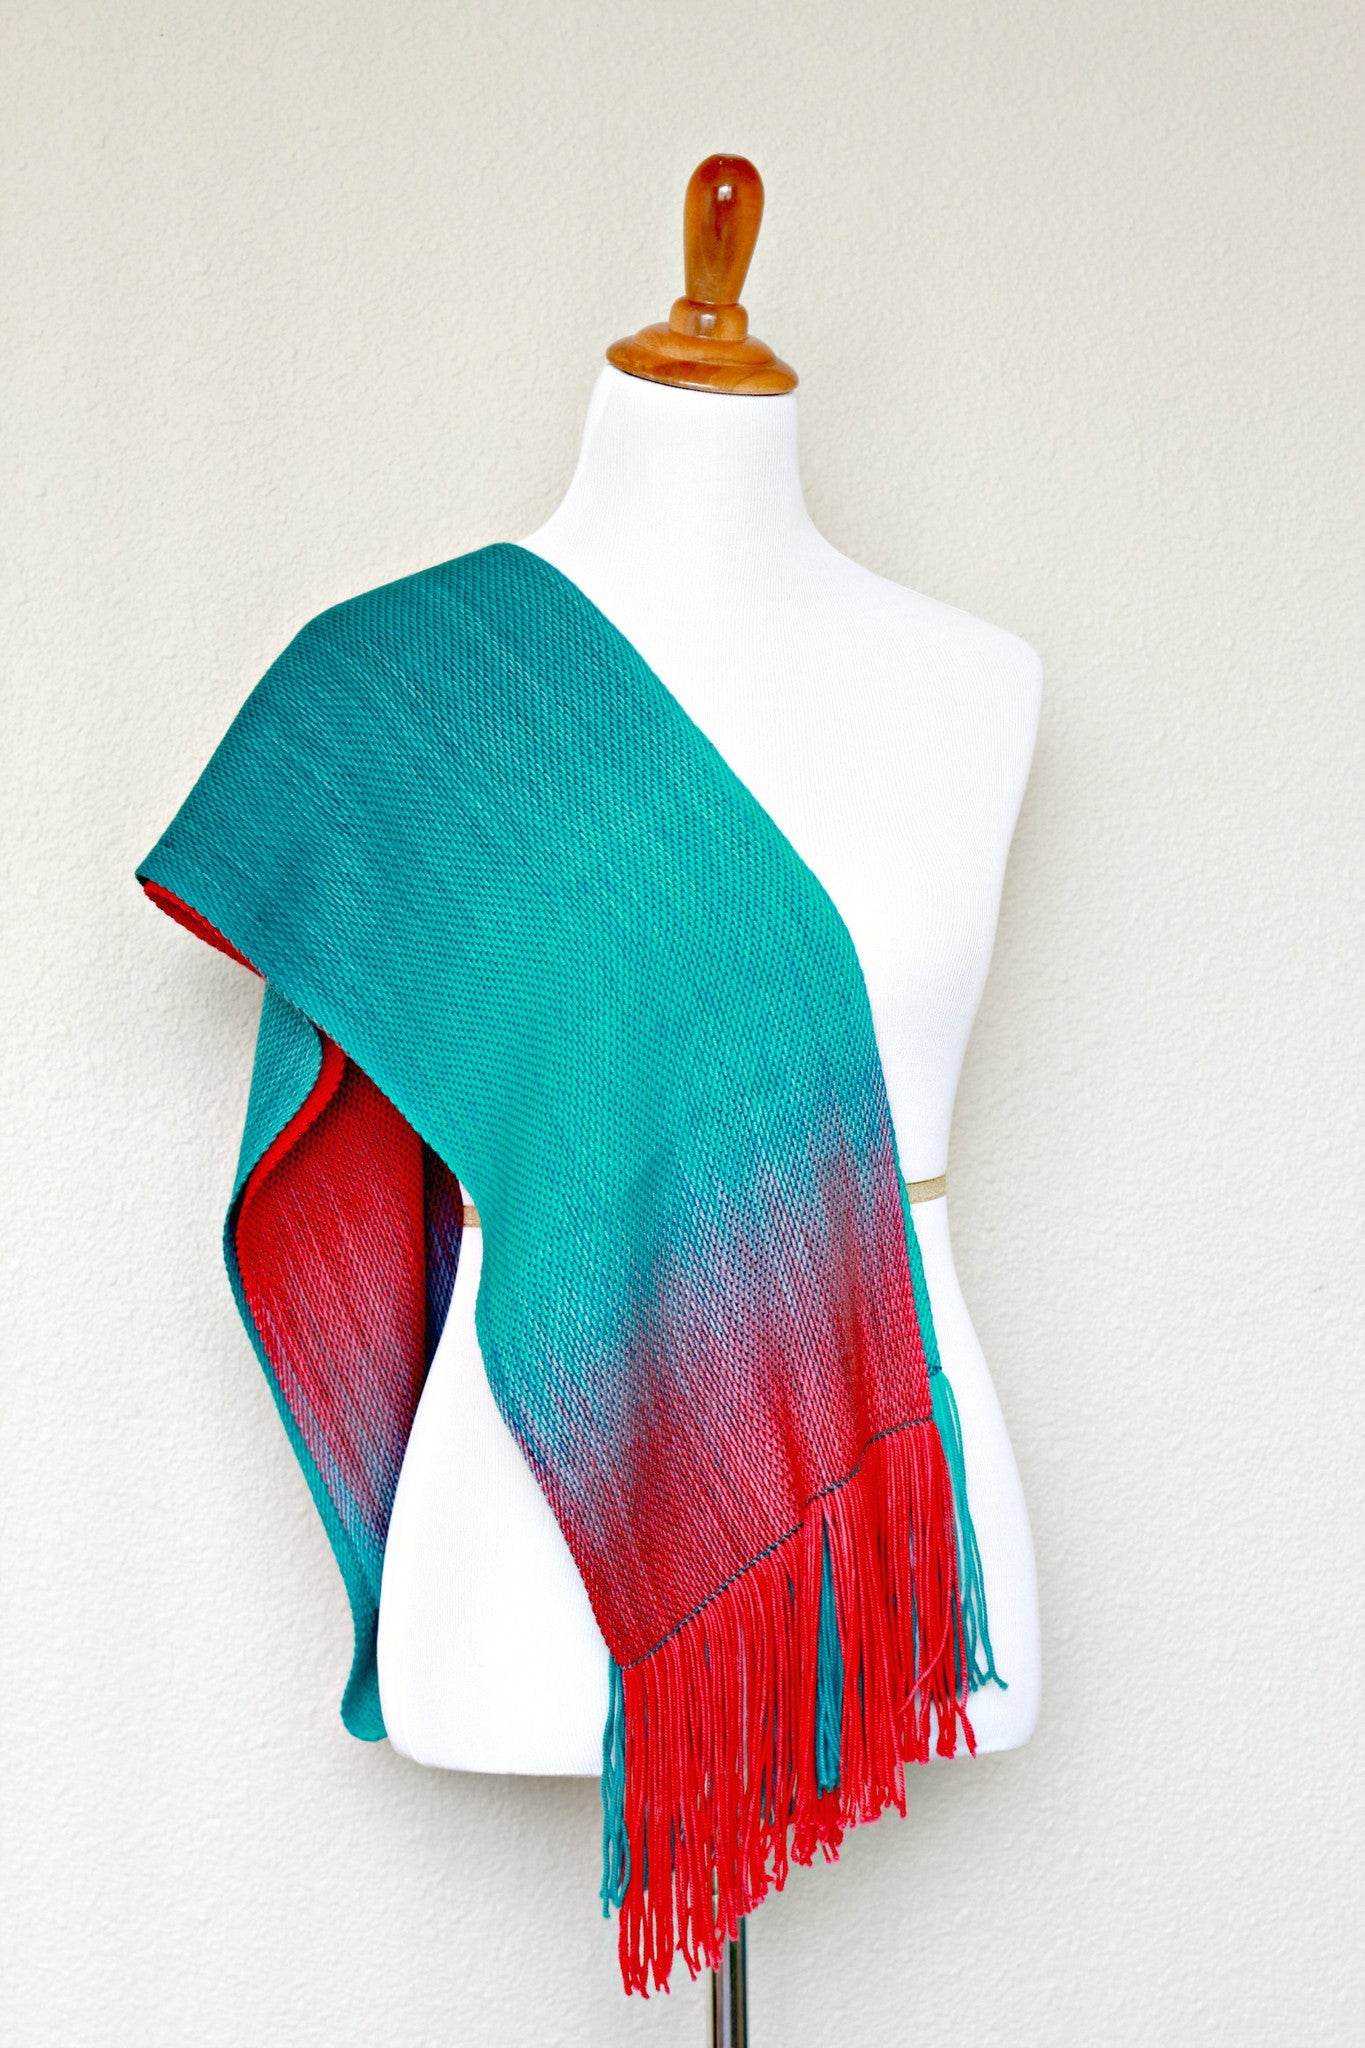 Woven scarf in teal and red colors, gift for her